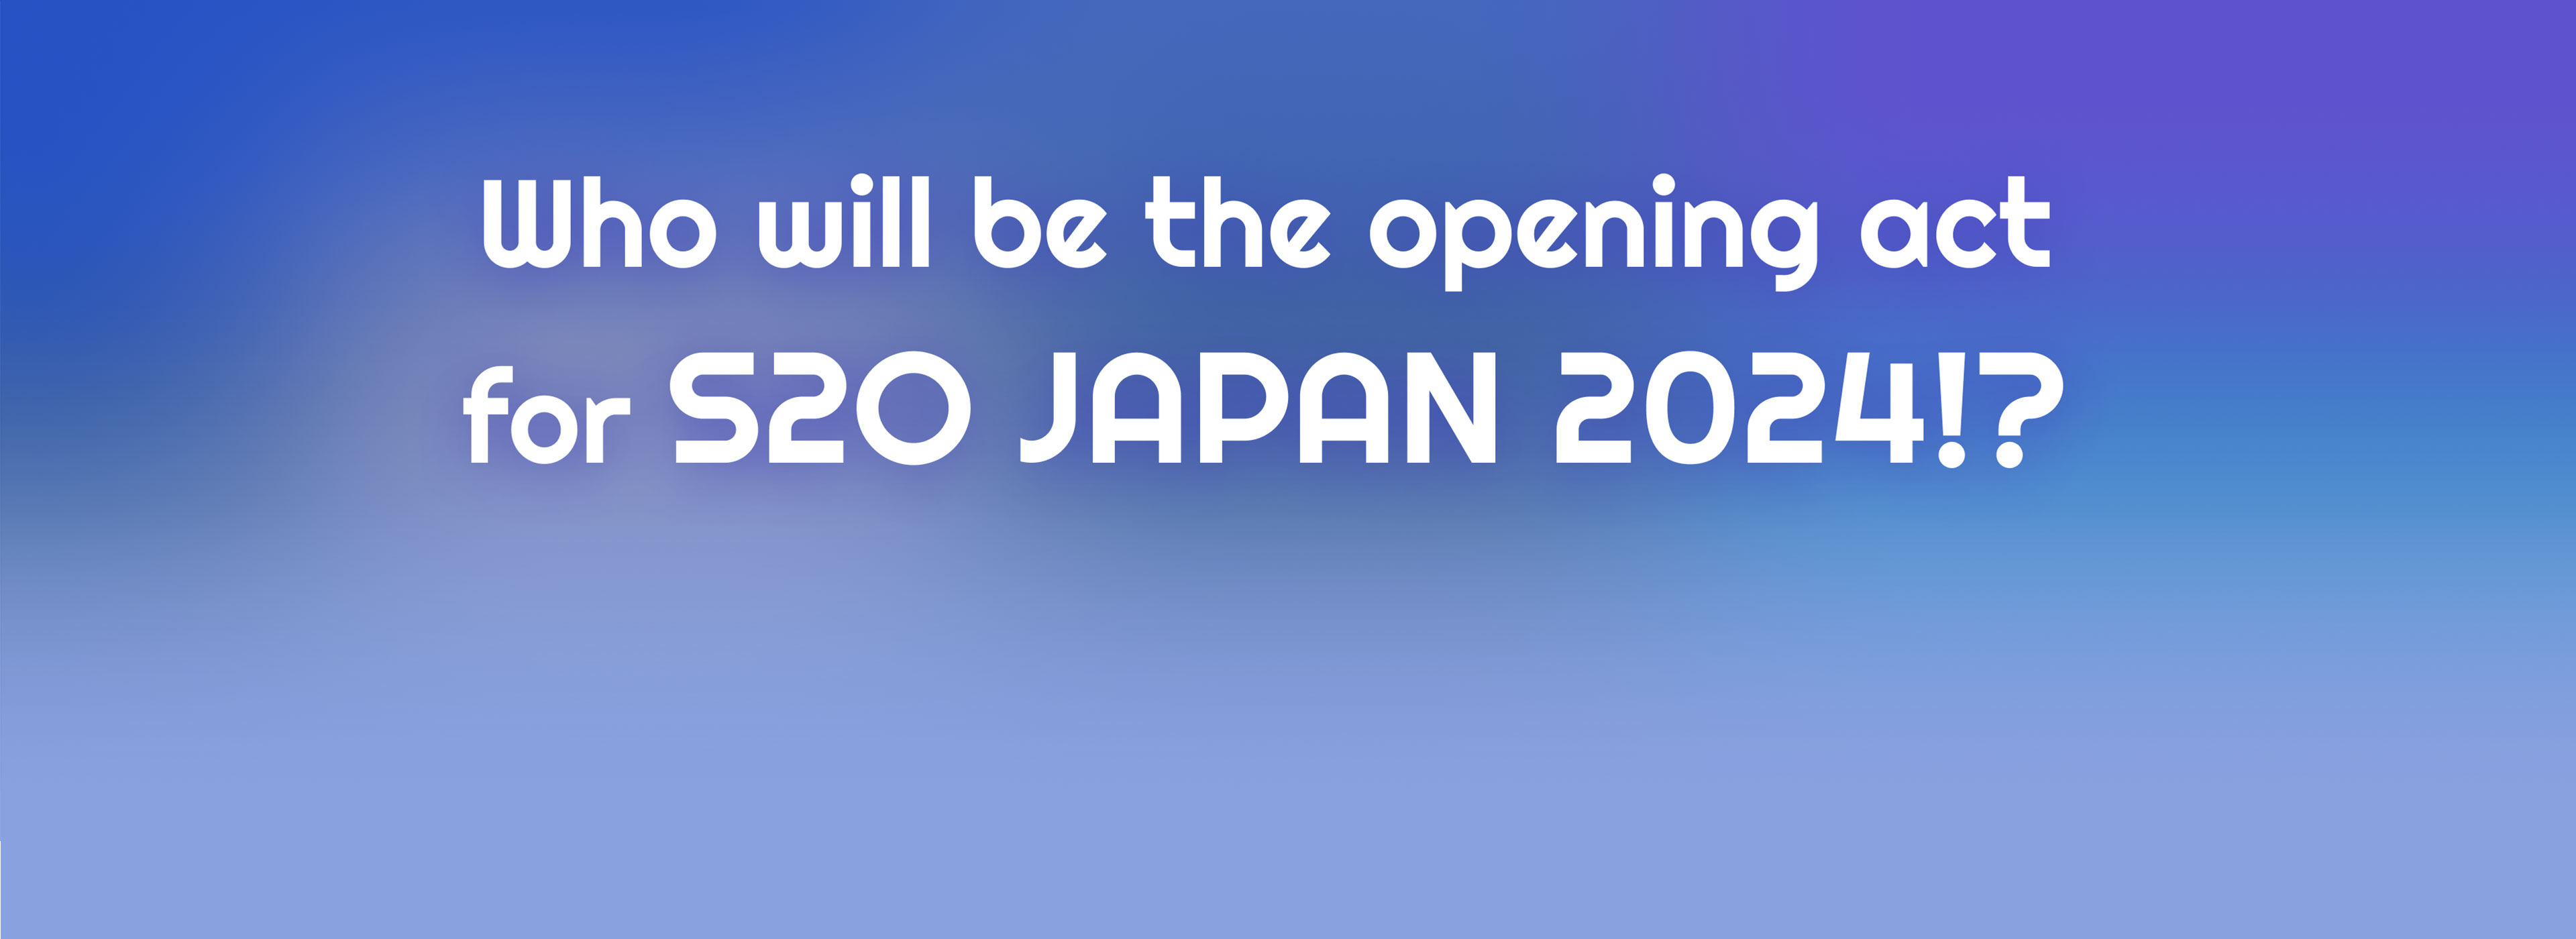 Who will be the opening act for S2O JAPAN 2024!?